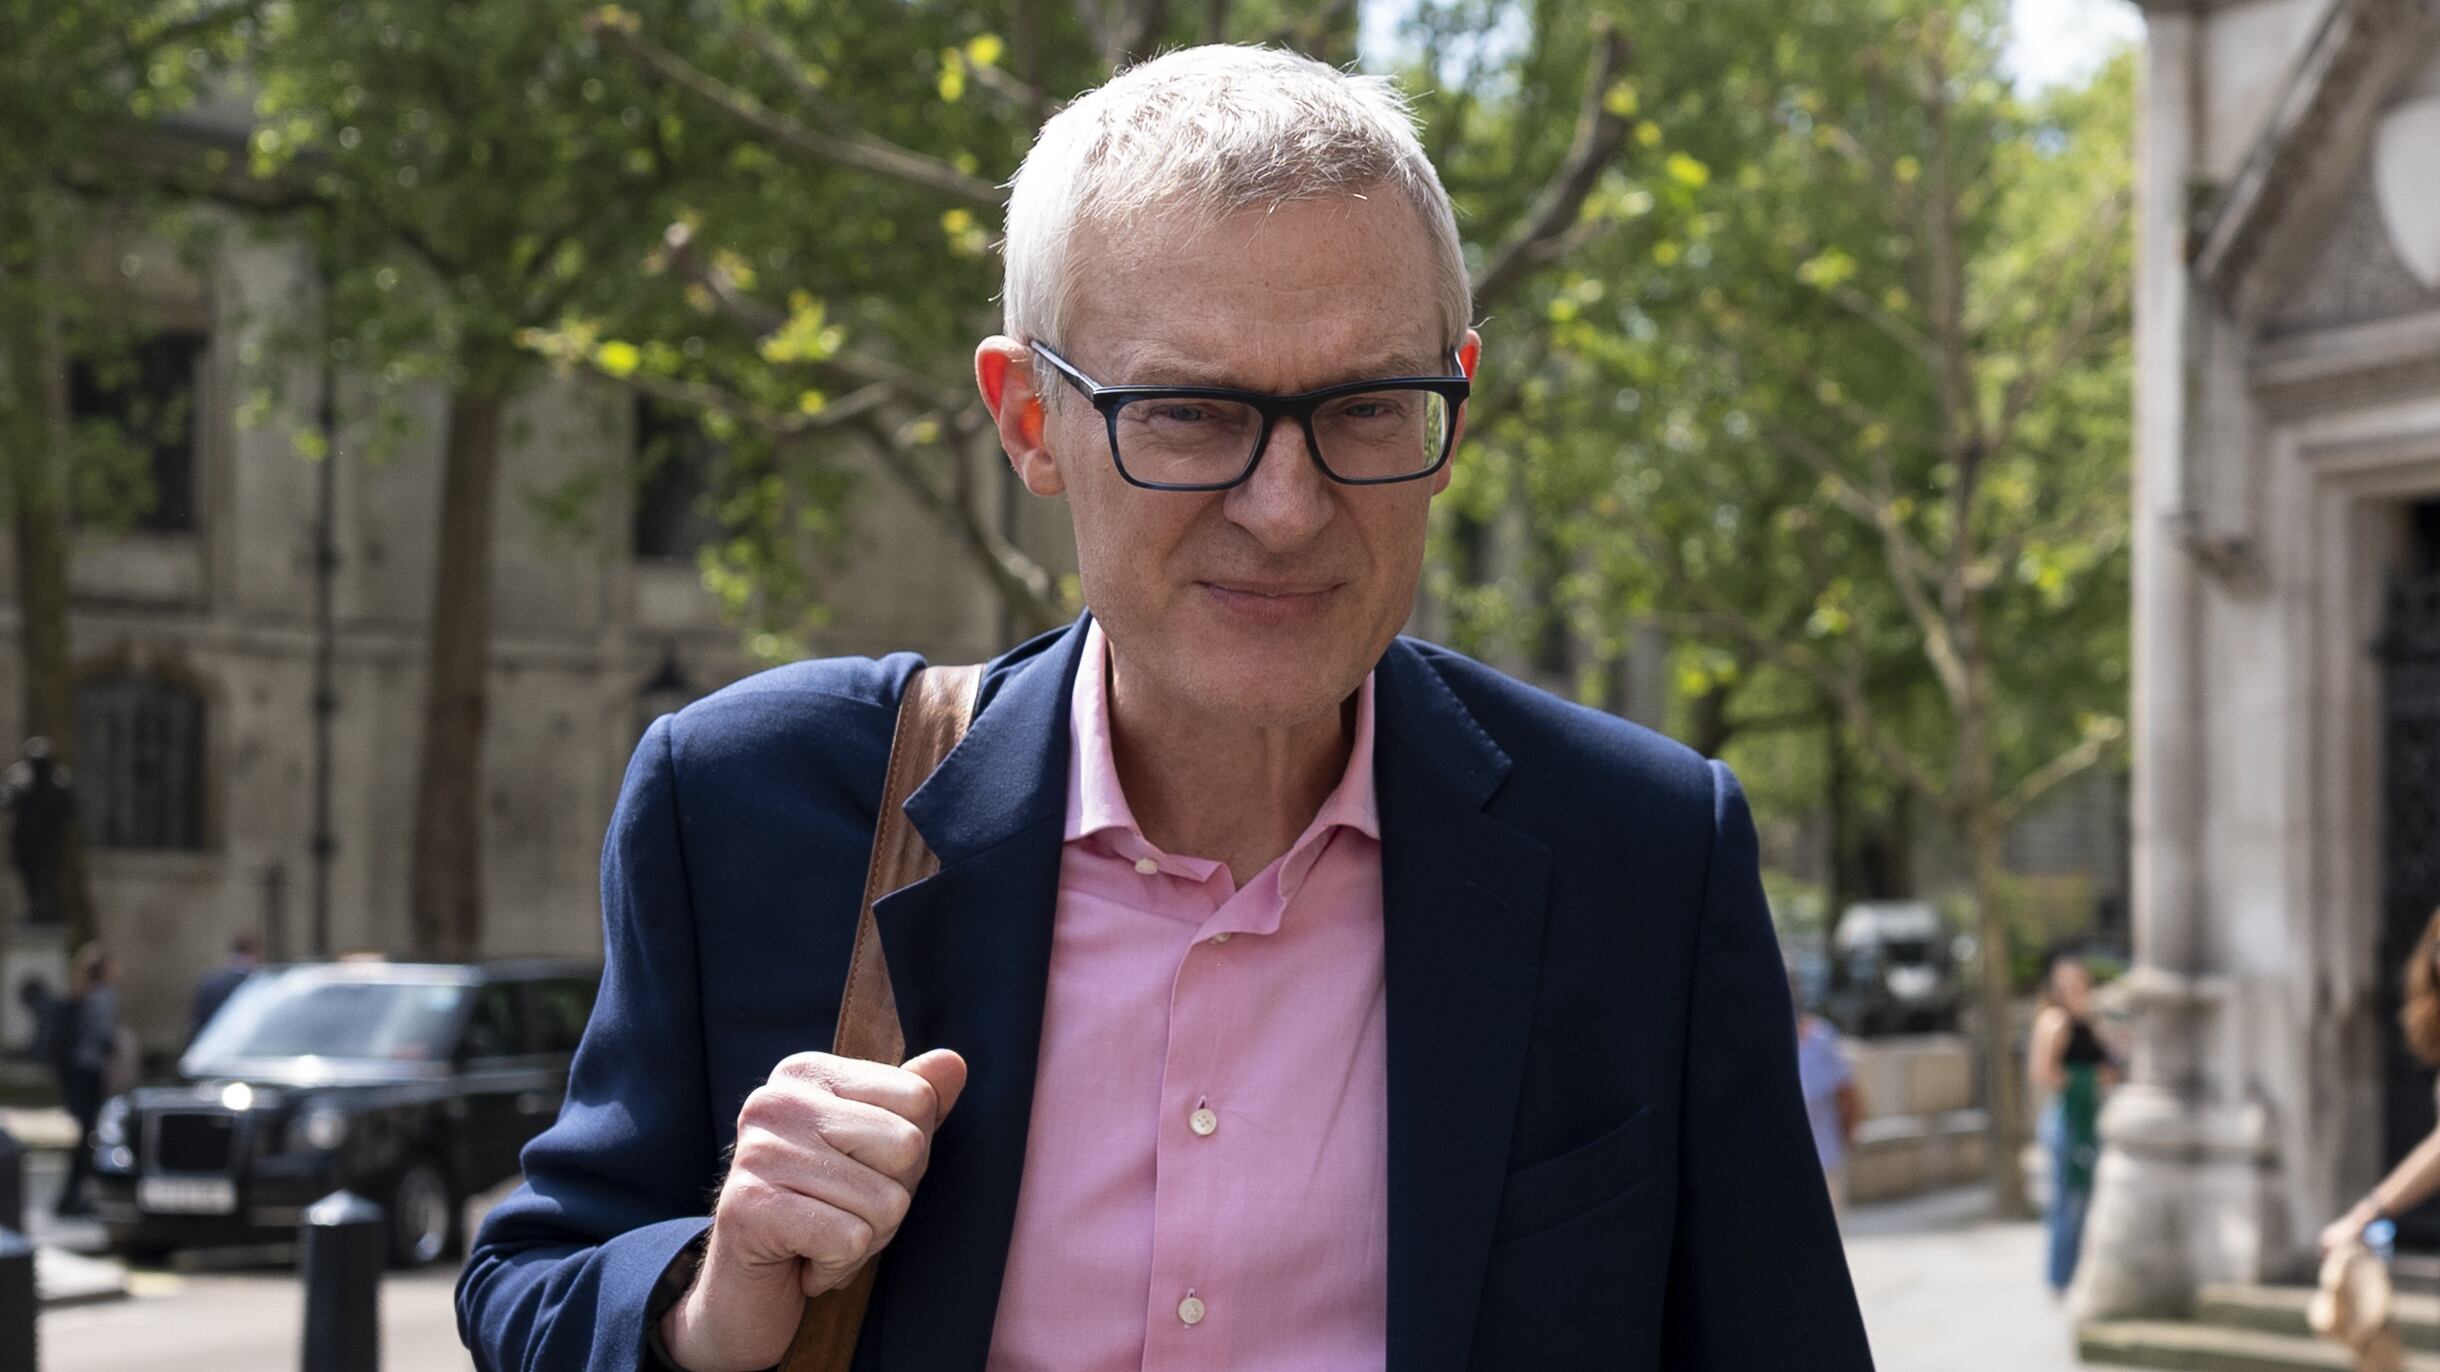 Jeremy Vine arrives at the Royal Courts of Justice in London for the first hearing in the libel claim brought by himself against Joey Barton